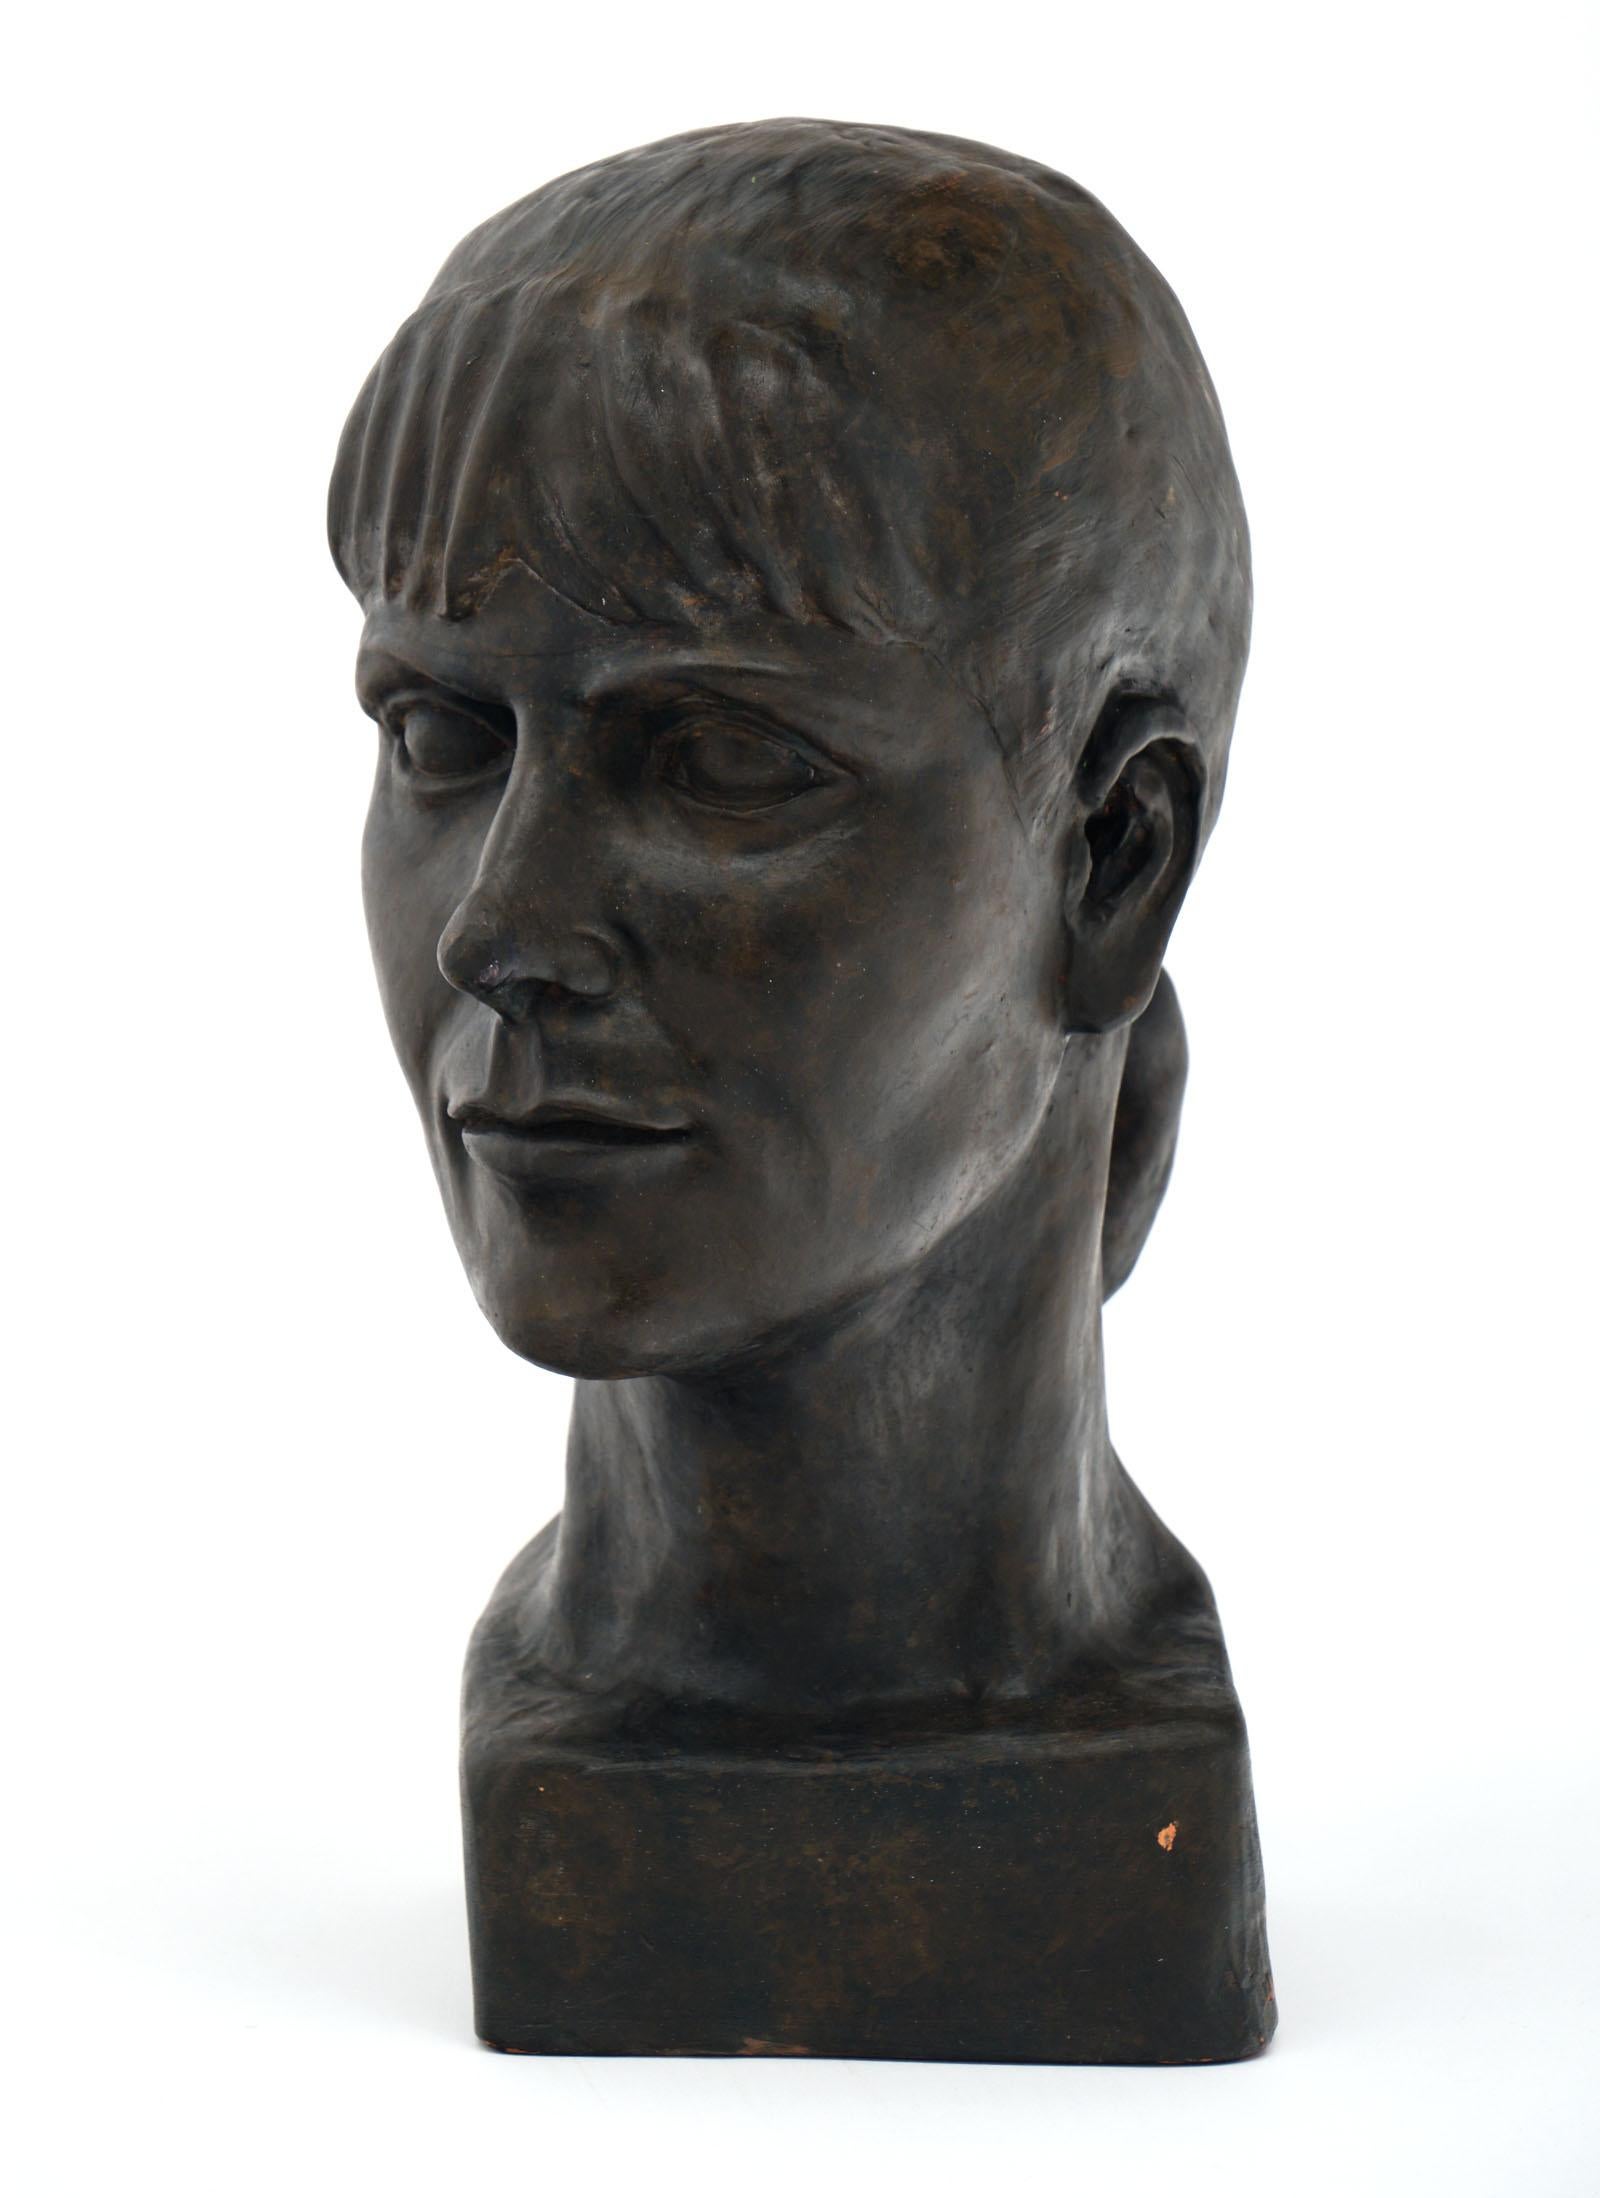 French terracotta bust of a woman. This piece is signed “DB 1990” and features a warm bronze color finish.